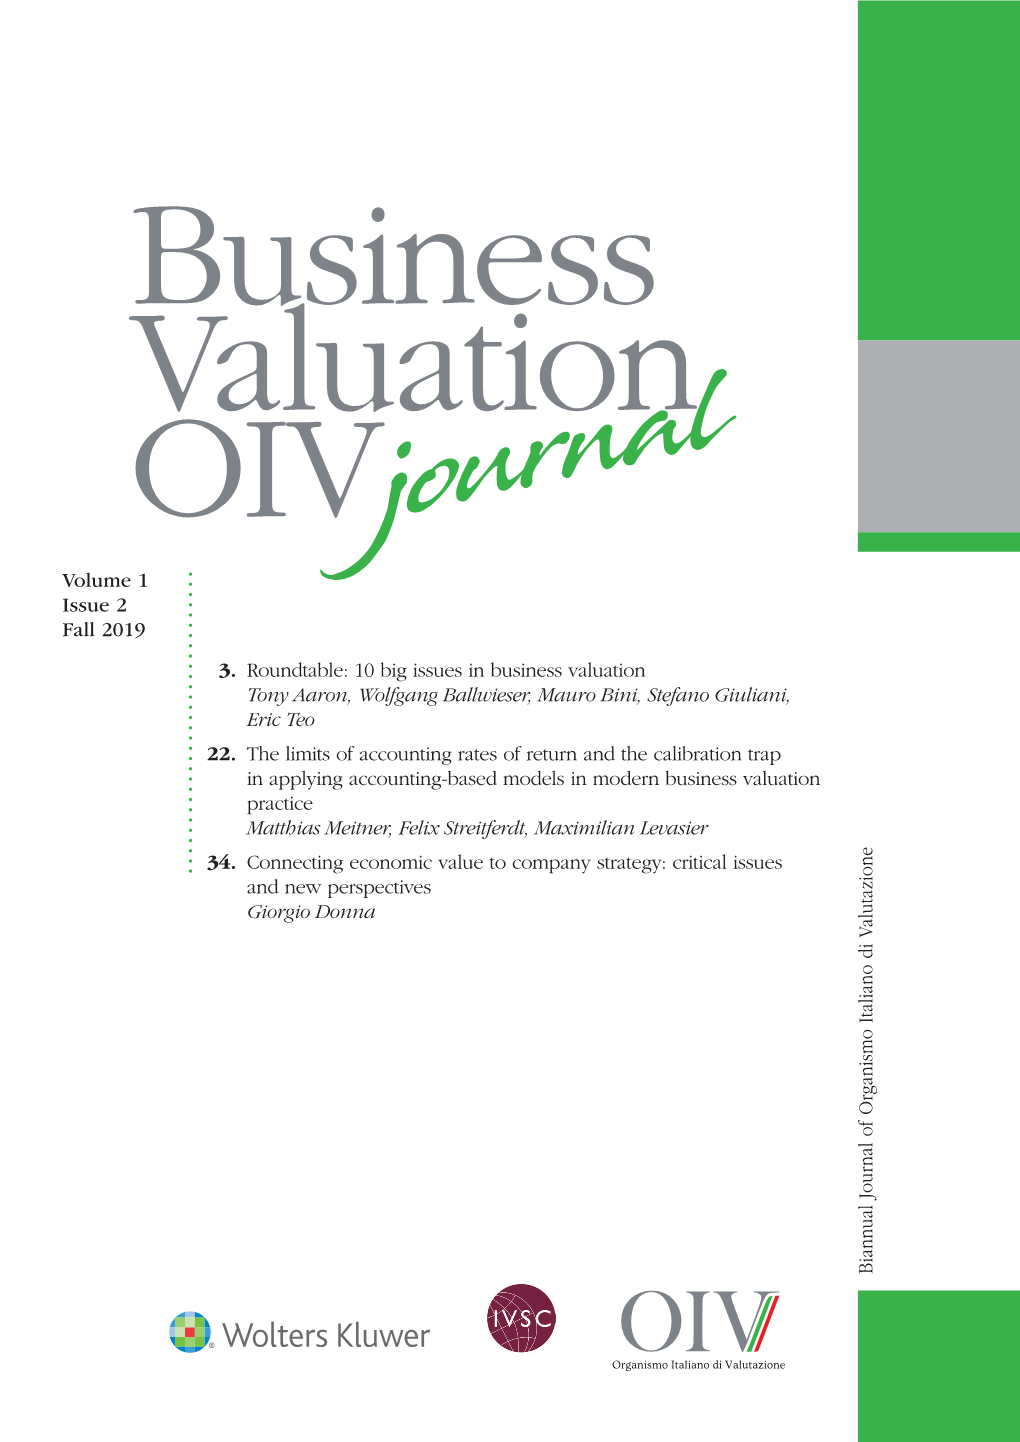 Business Valuation Journal Vol.1 Issue 2 Fall 2019.Pdf